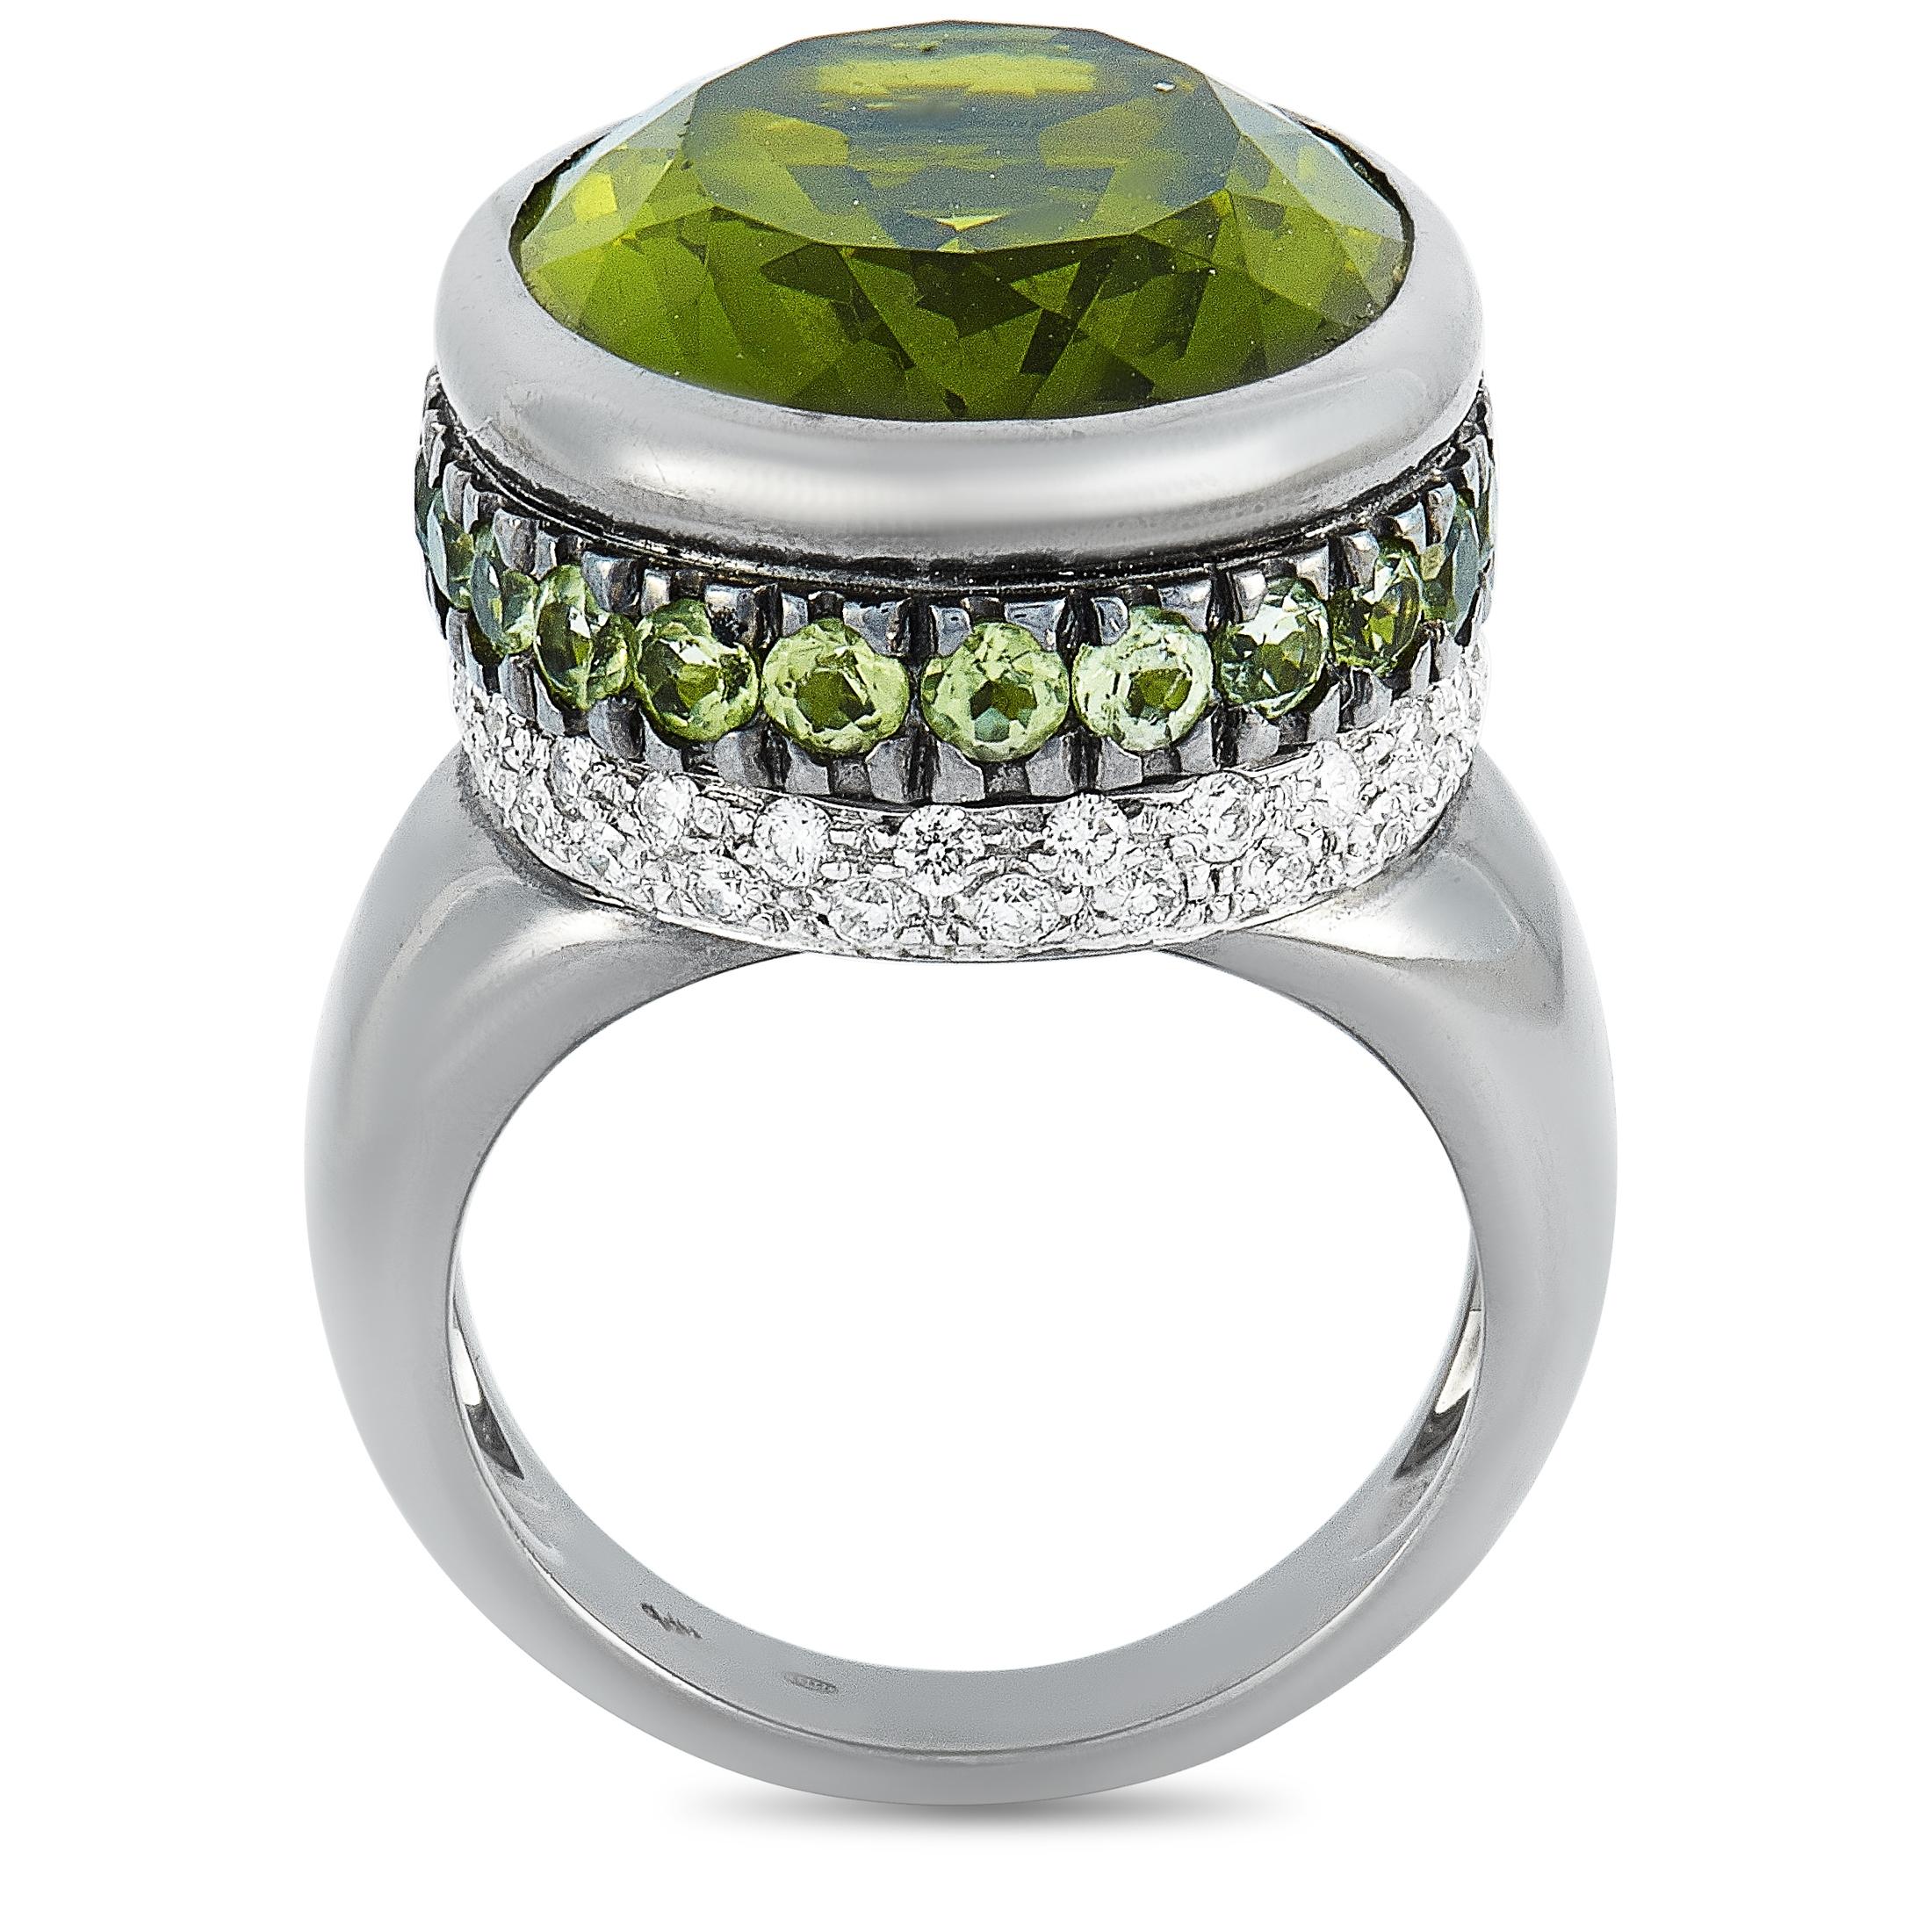 This Oro Trend ring is made of 18K white gold and weighs 20.7 grams, boasting band thickness of 4 mm and top height of 12 mm, while top dimensions measure 18 by 22 mm. The ring is embellished with peridots and a total of 0.69 carats of diamonds.
 
